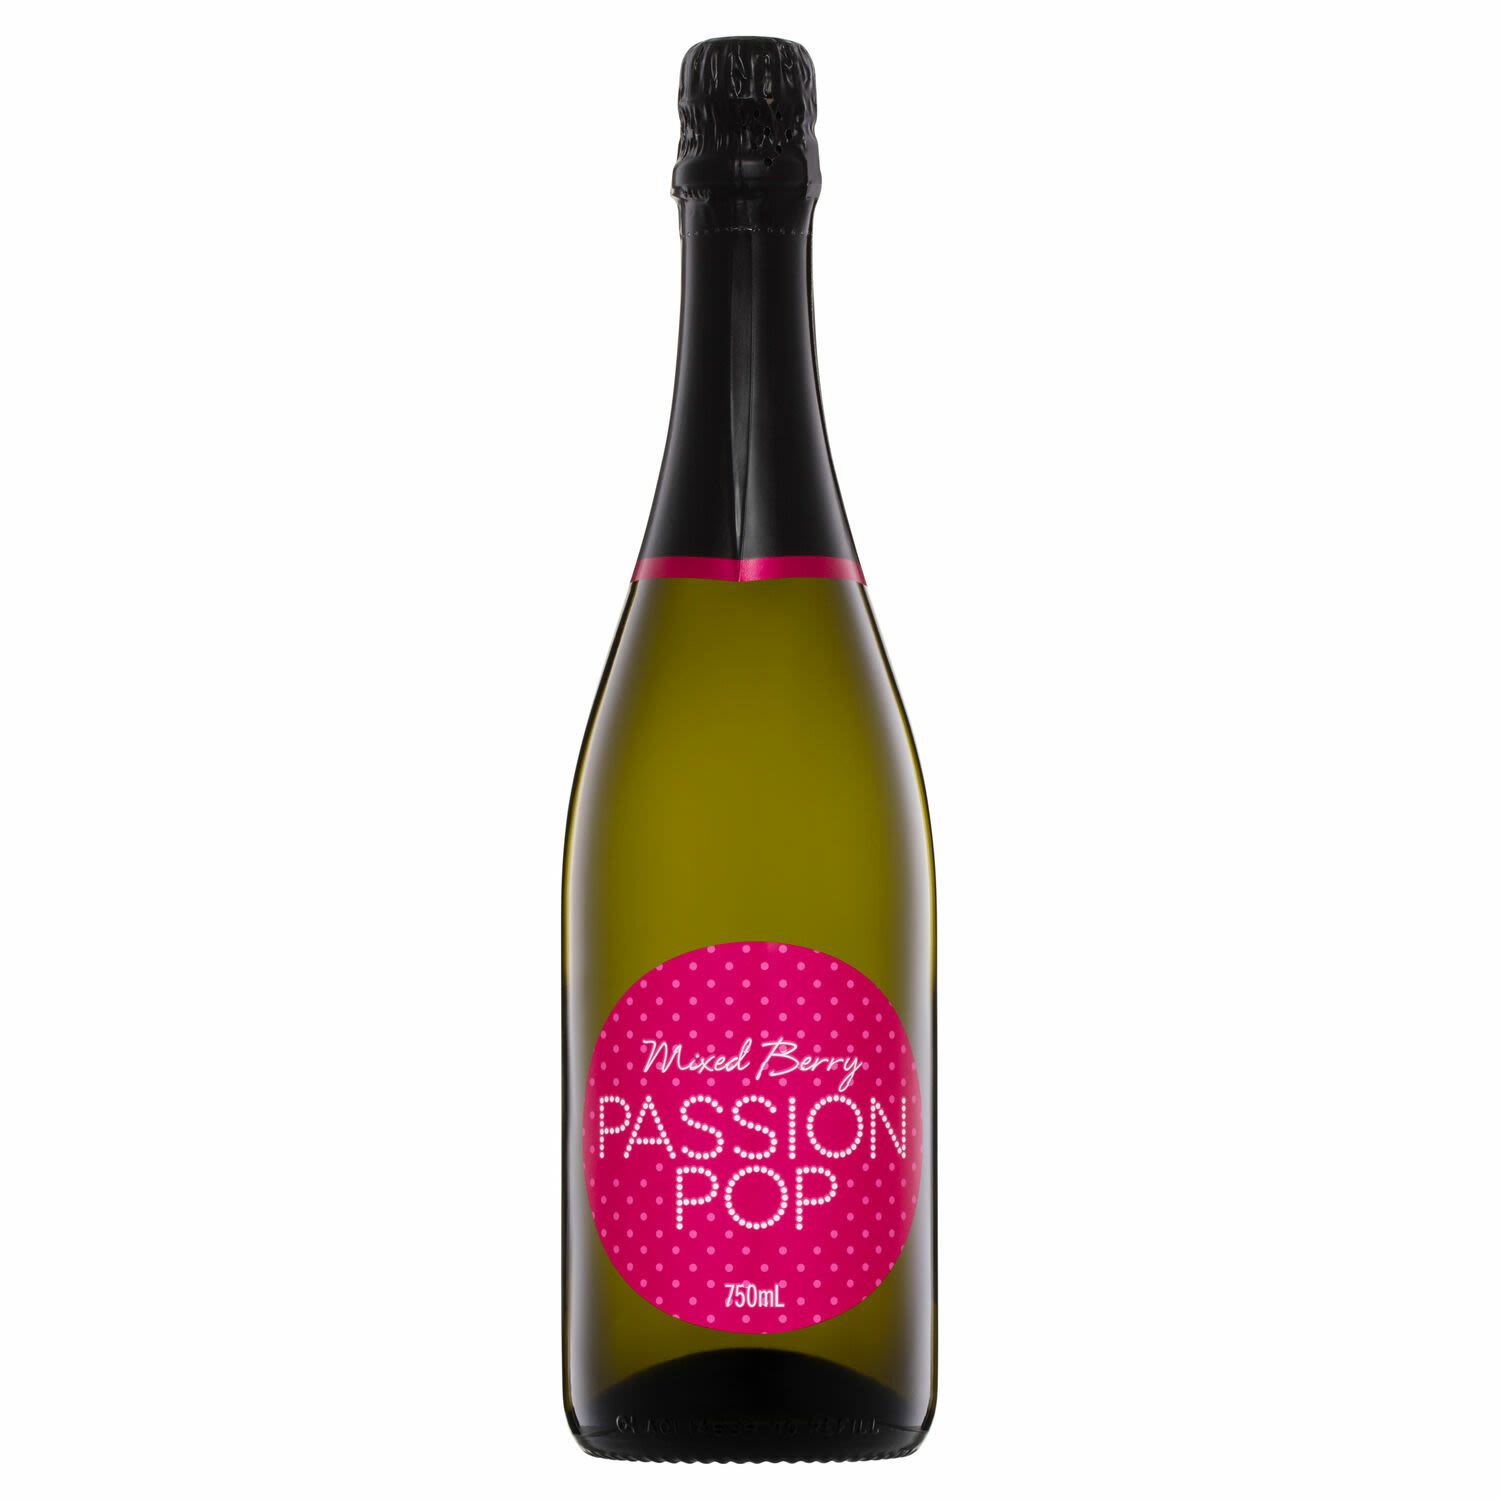 Golden Gate Passion Mixed Berry 750mL Bottle